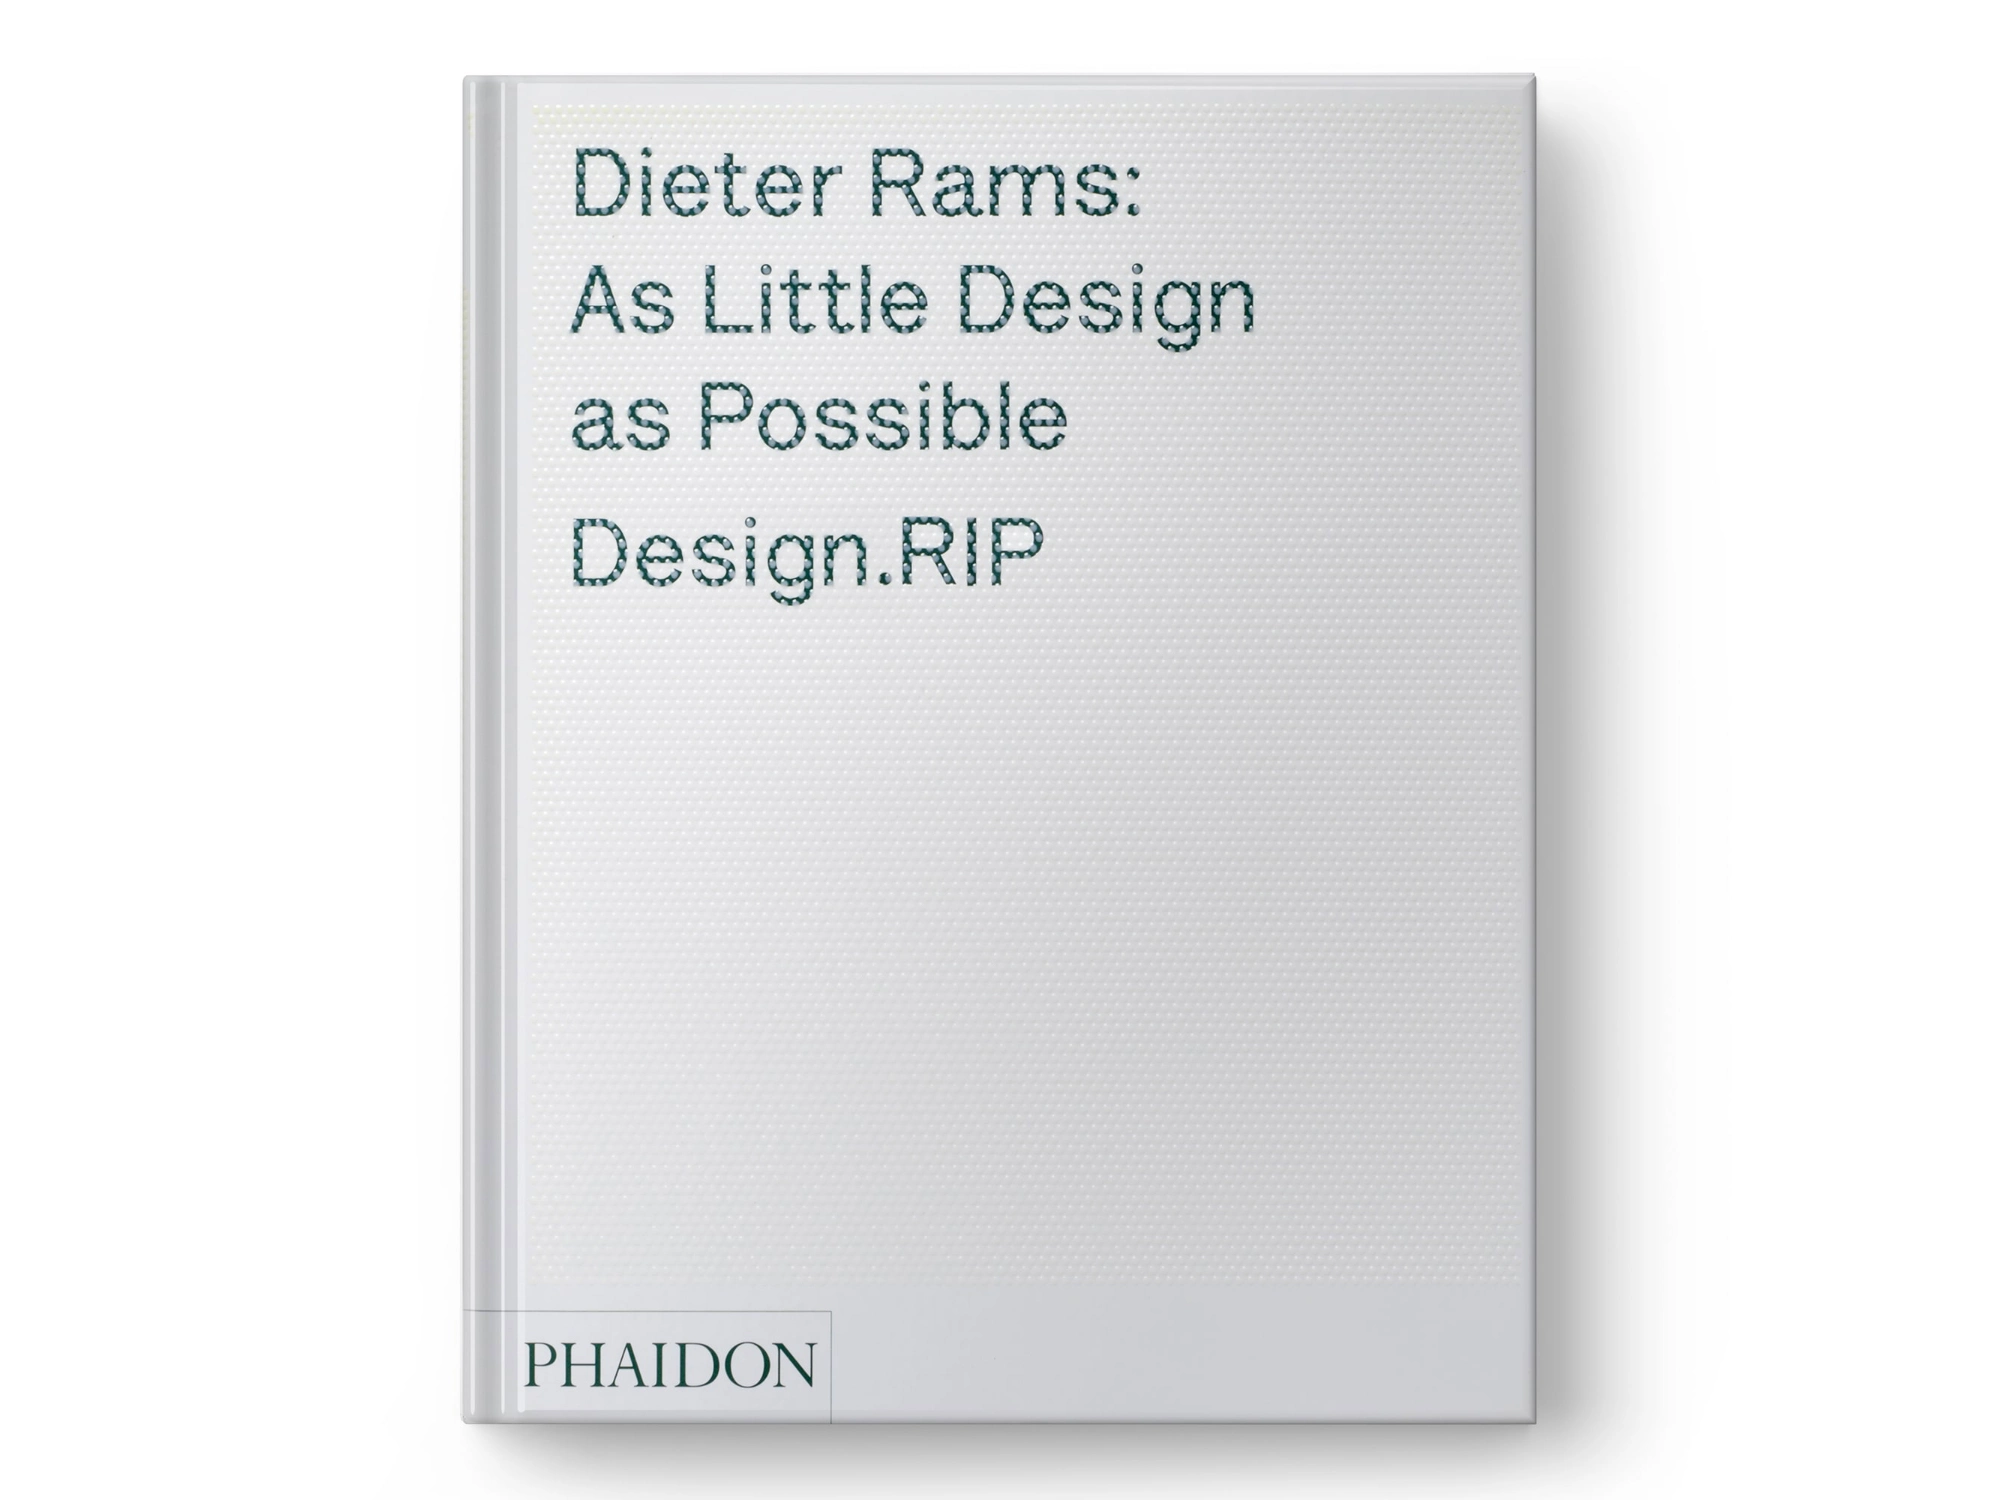 [VIP] DIETER RAMS: AS LITTLE DESIGN AS POSSIBLE